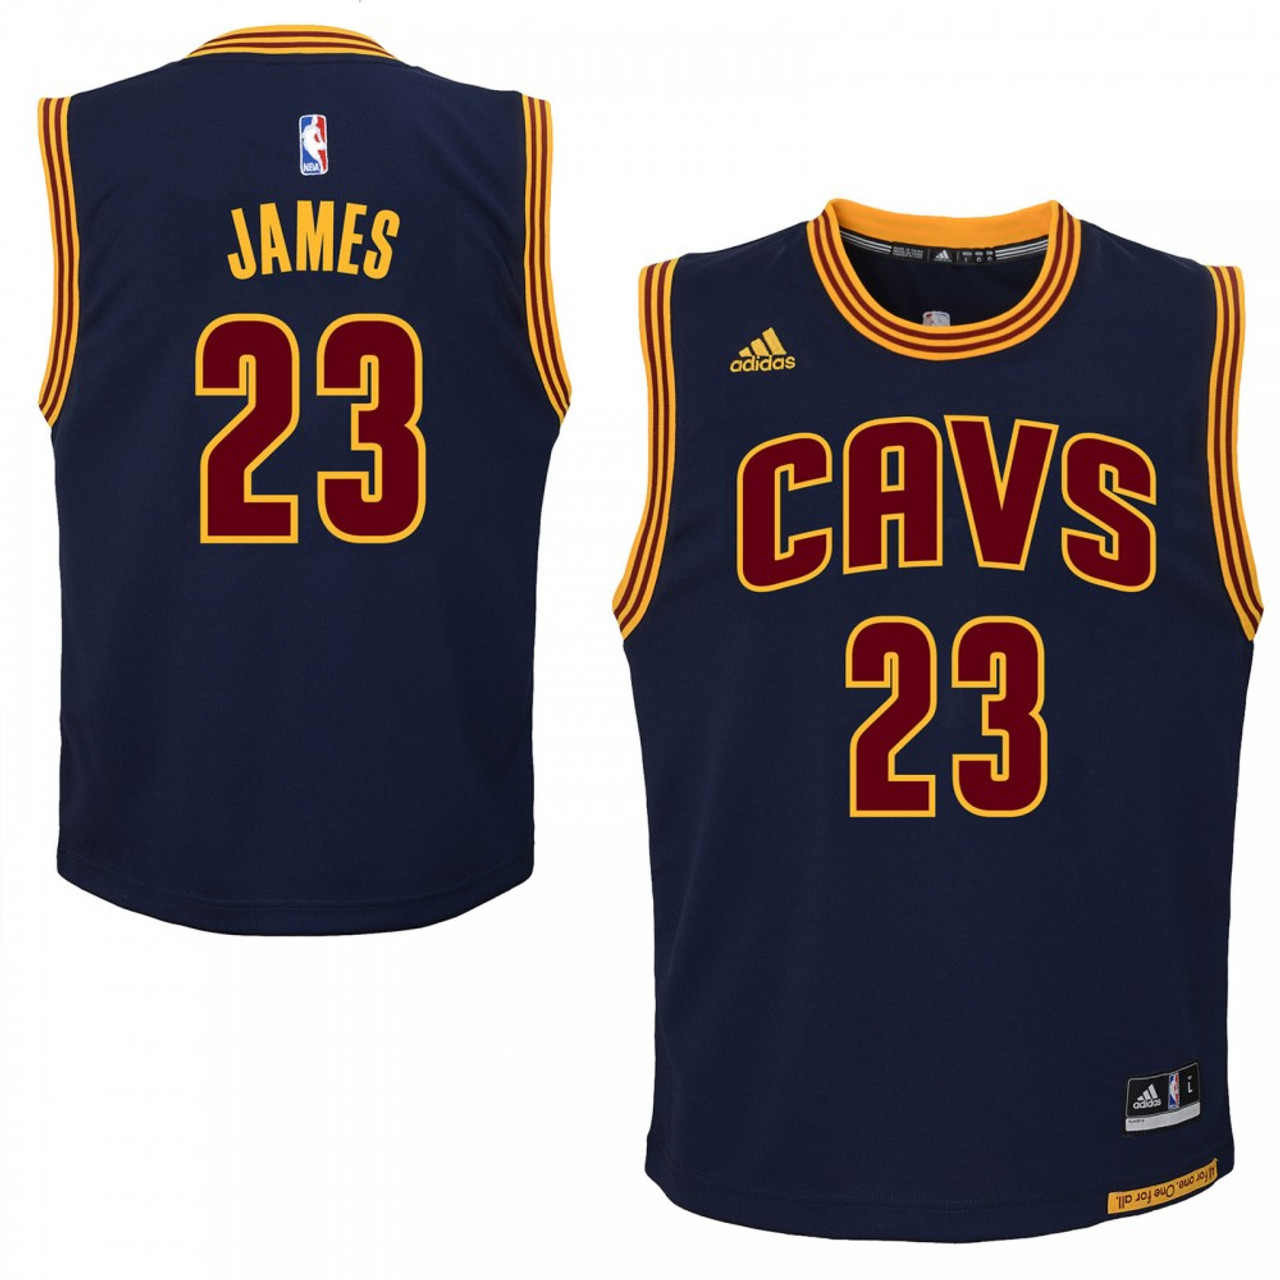 lebron youth jersey cavs